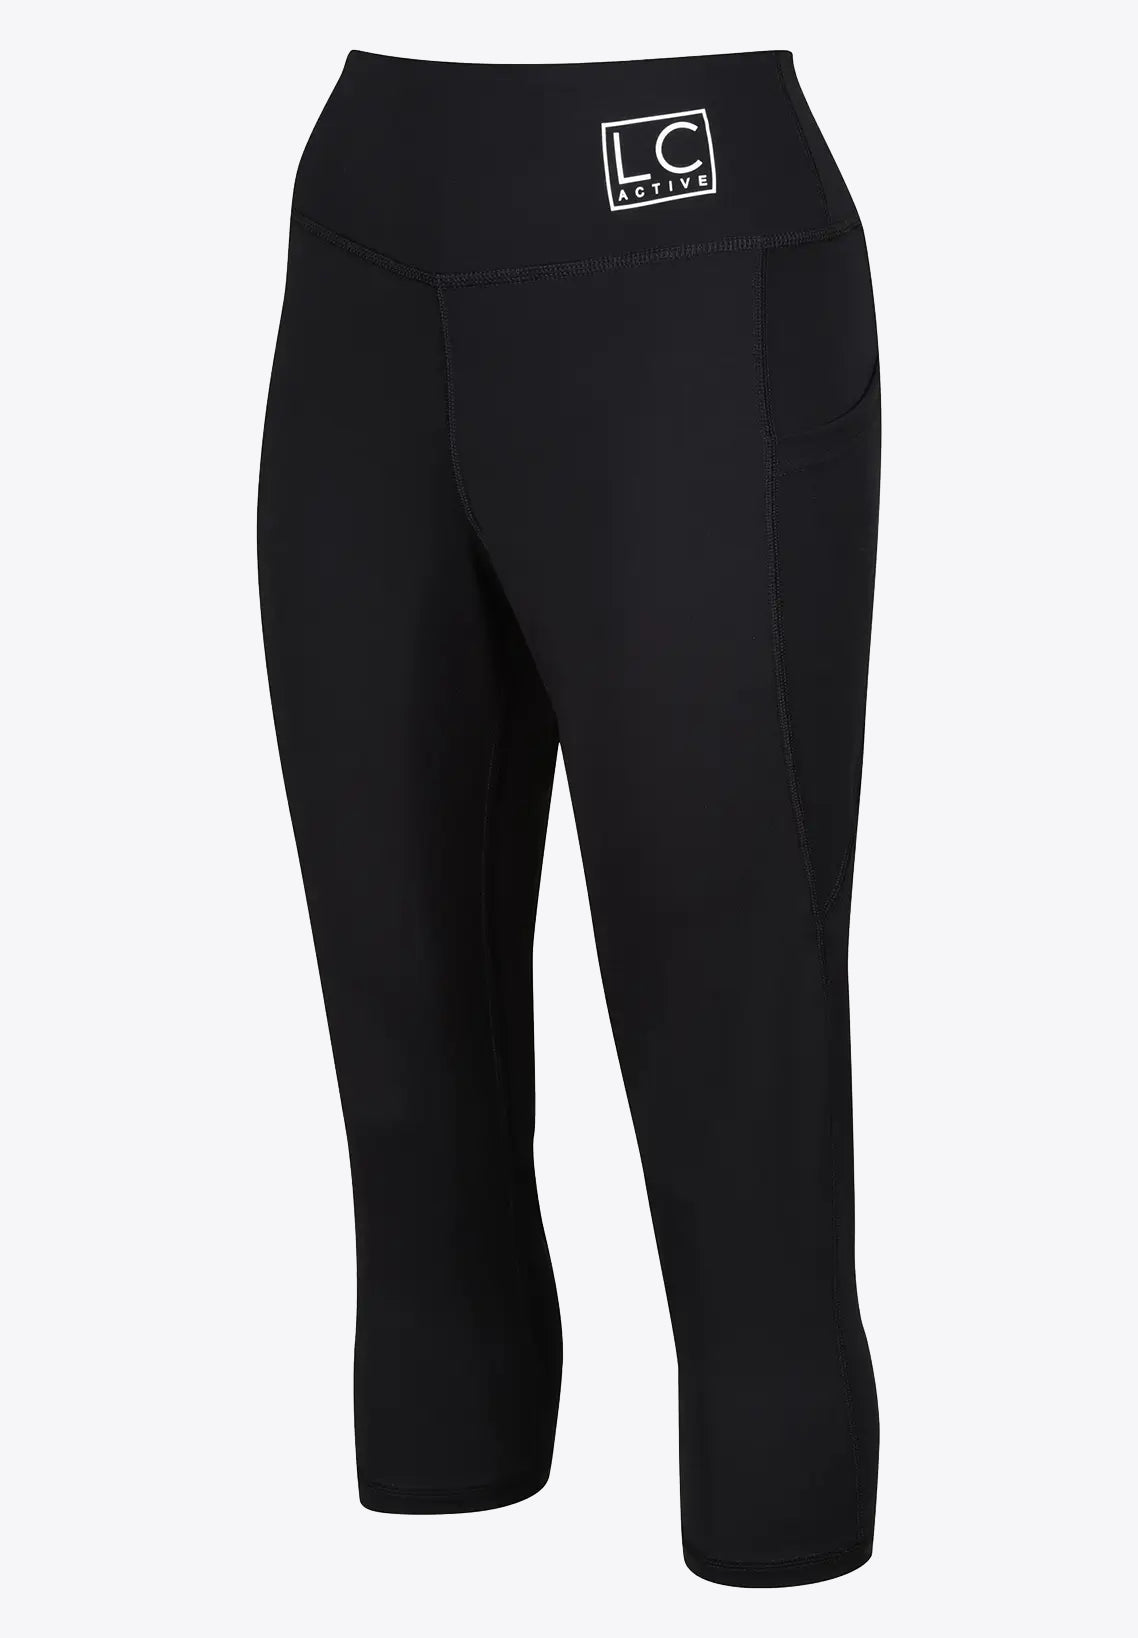 Cropped High Waisted Gym Leggings With Pockets For Women - LC Active Black